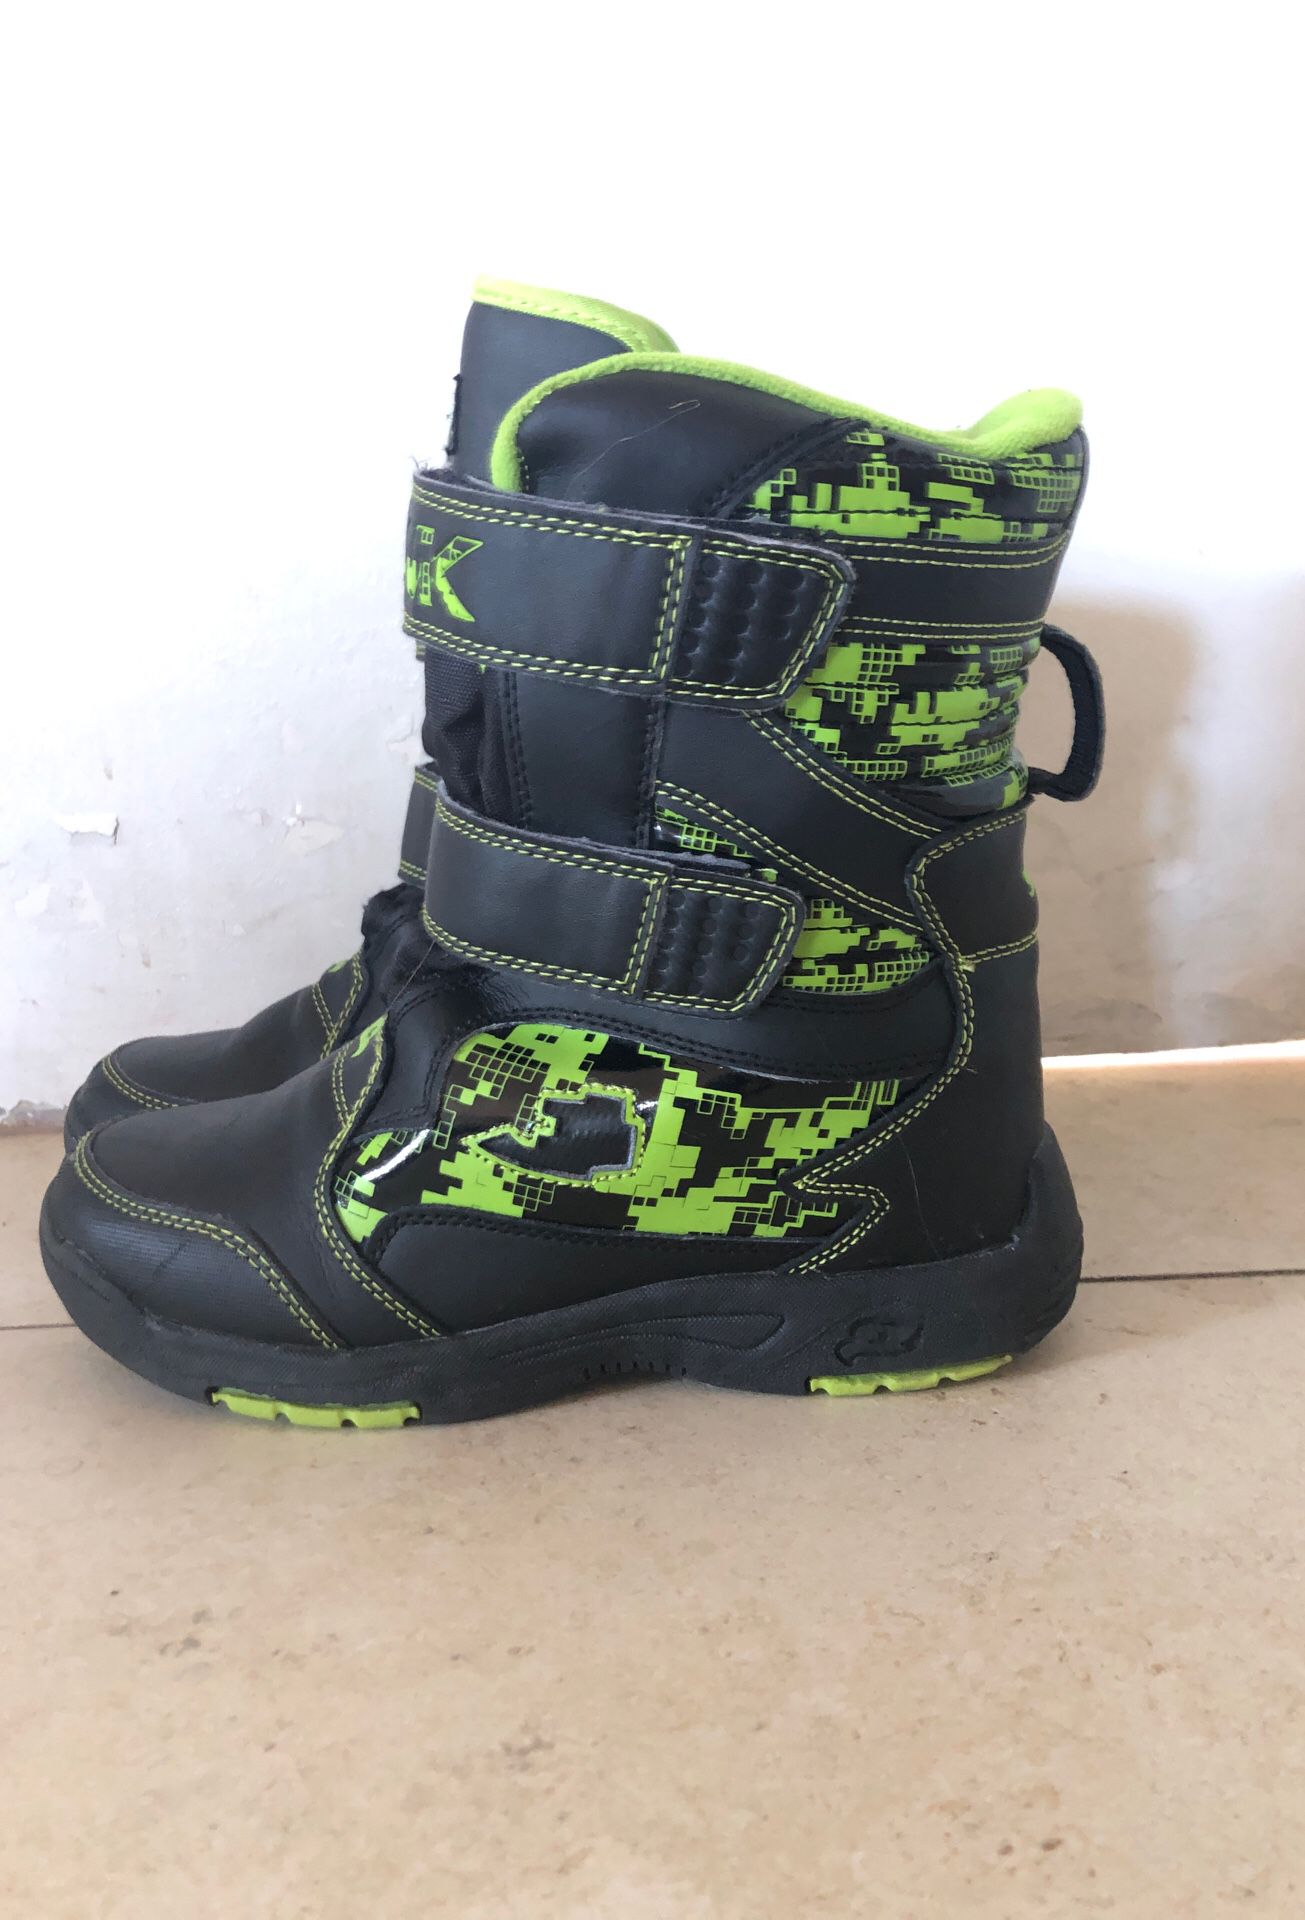 Snow boots for kids